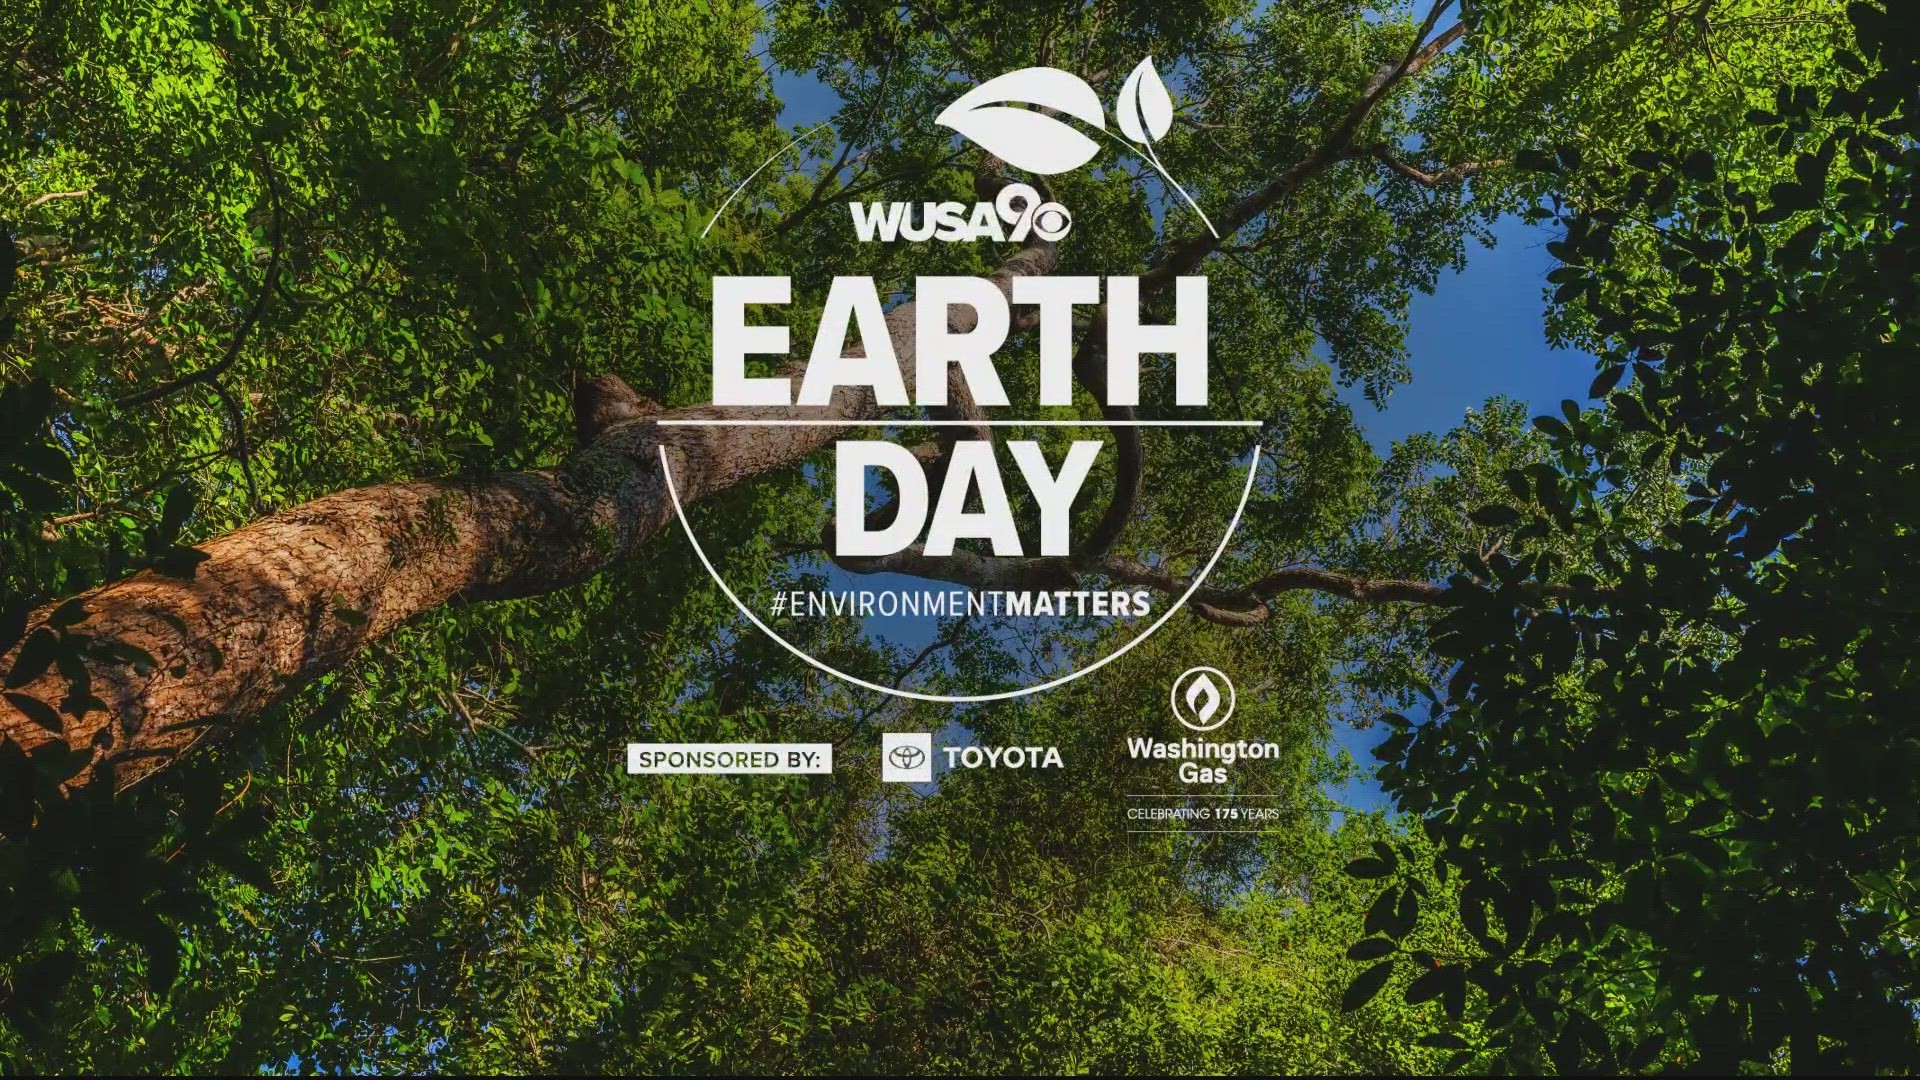 Earth Day 2023 events with WUSA9